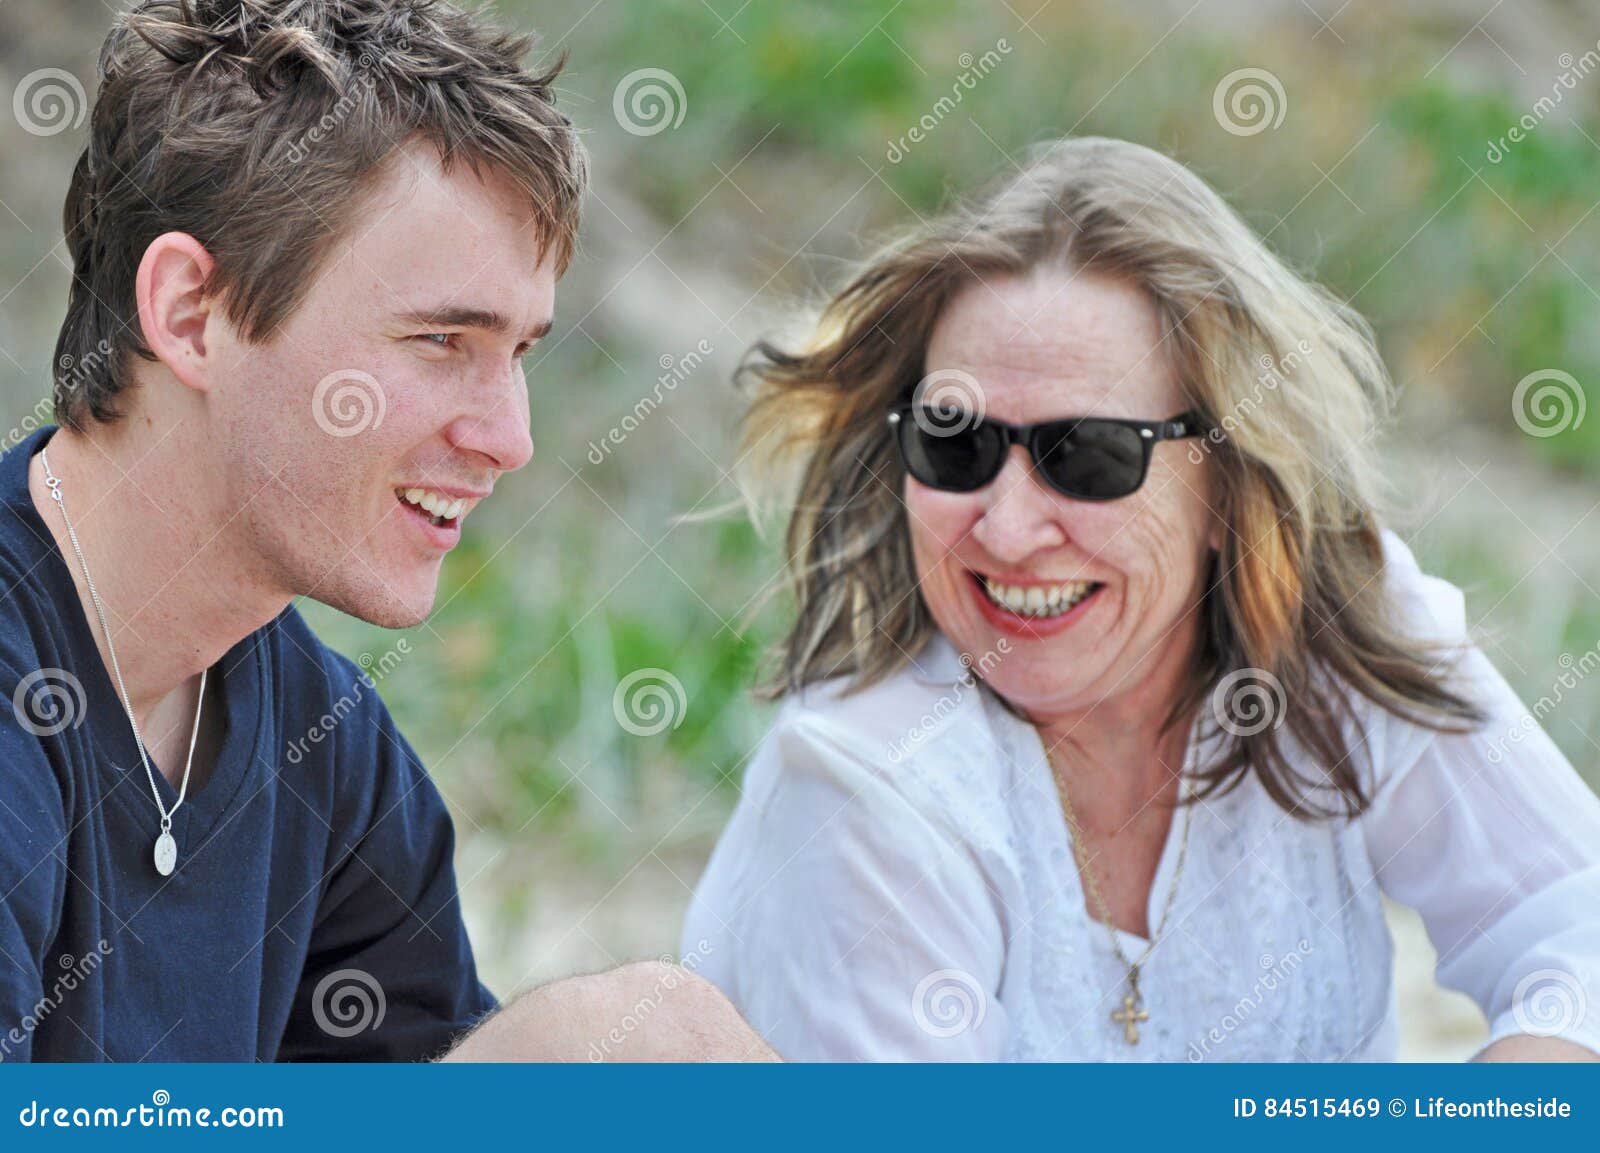 mother laughing smiling loving sharing time with son on summer beach holiday